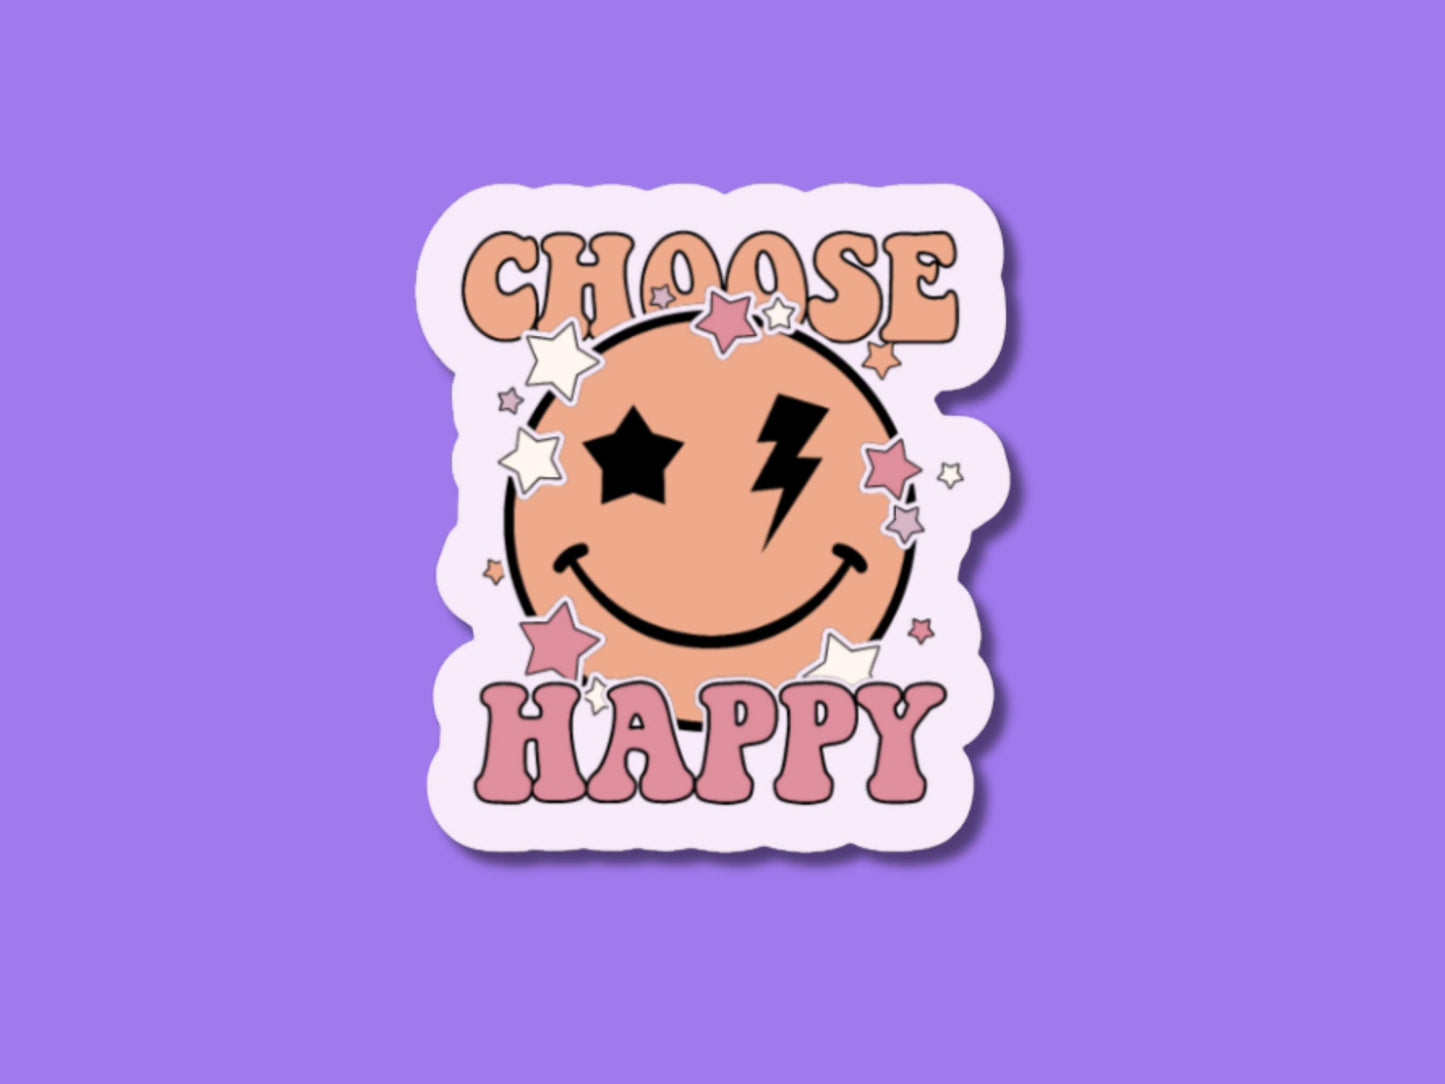 choose happy sticker, sticker for laptop, water bottle sticker, smiley face stickers, gifts for daughters, happiness stickers, positivity